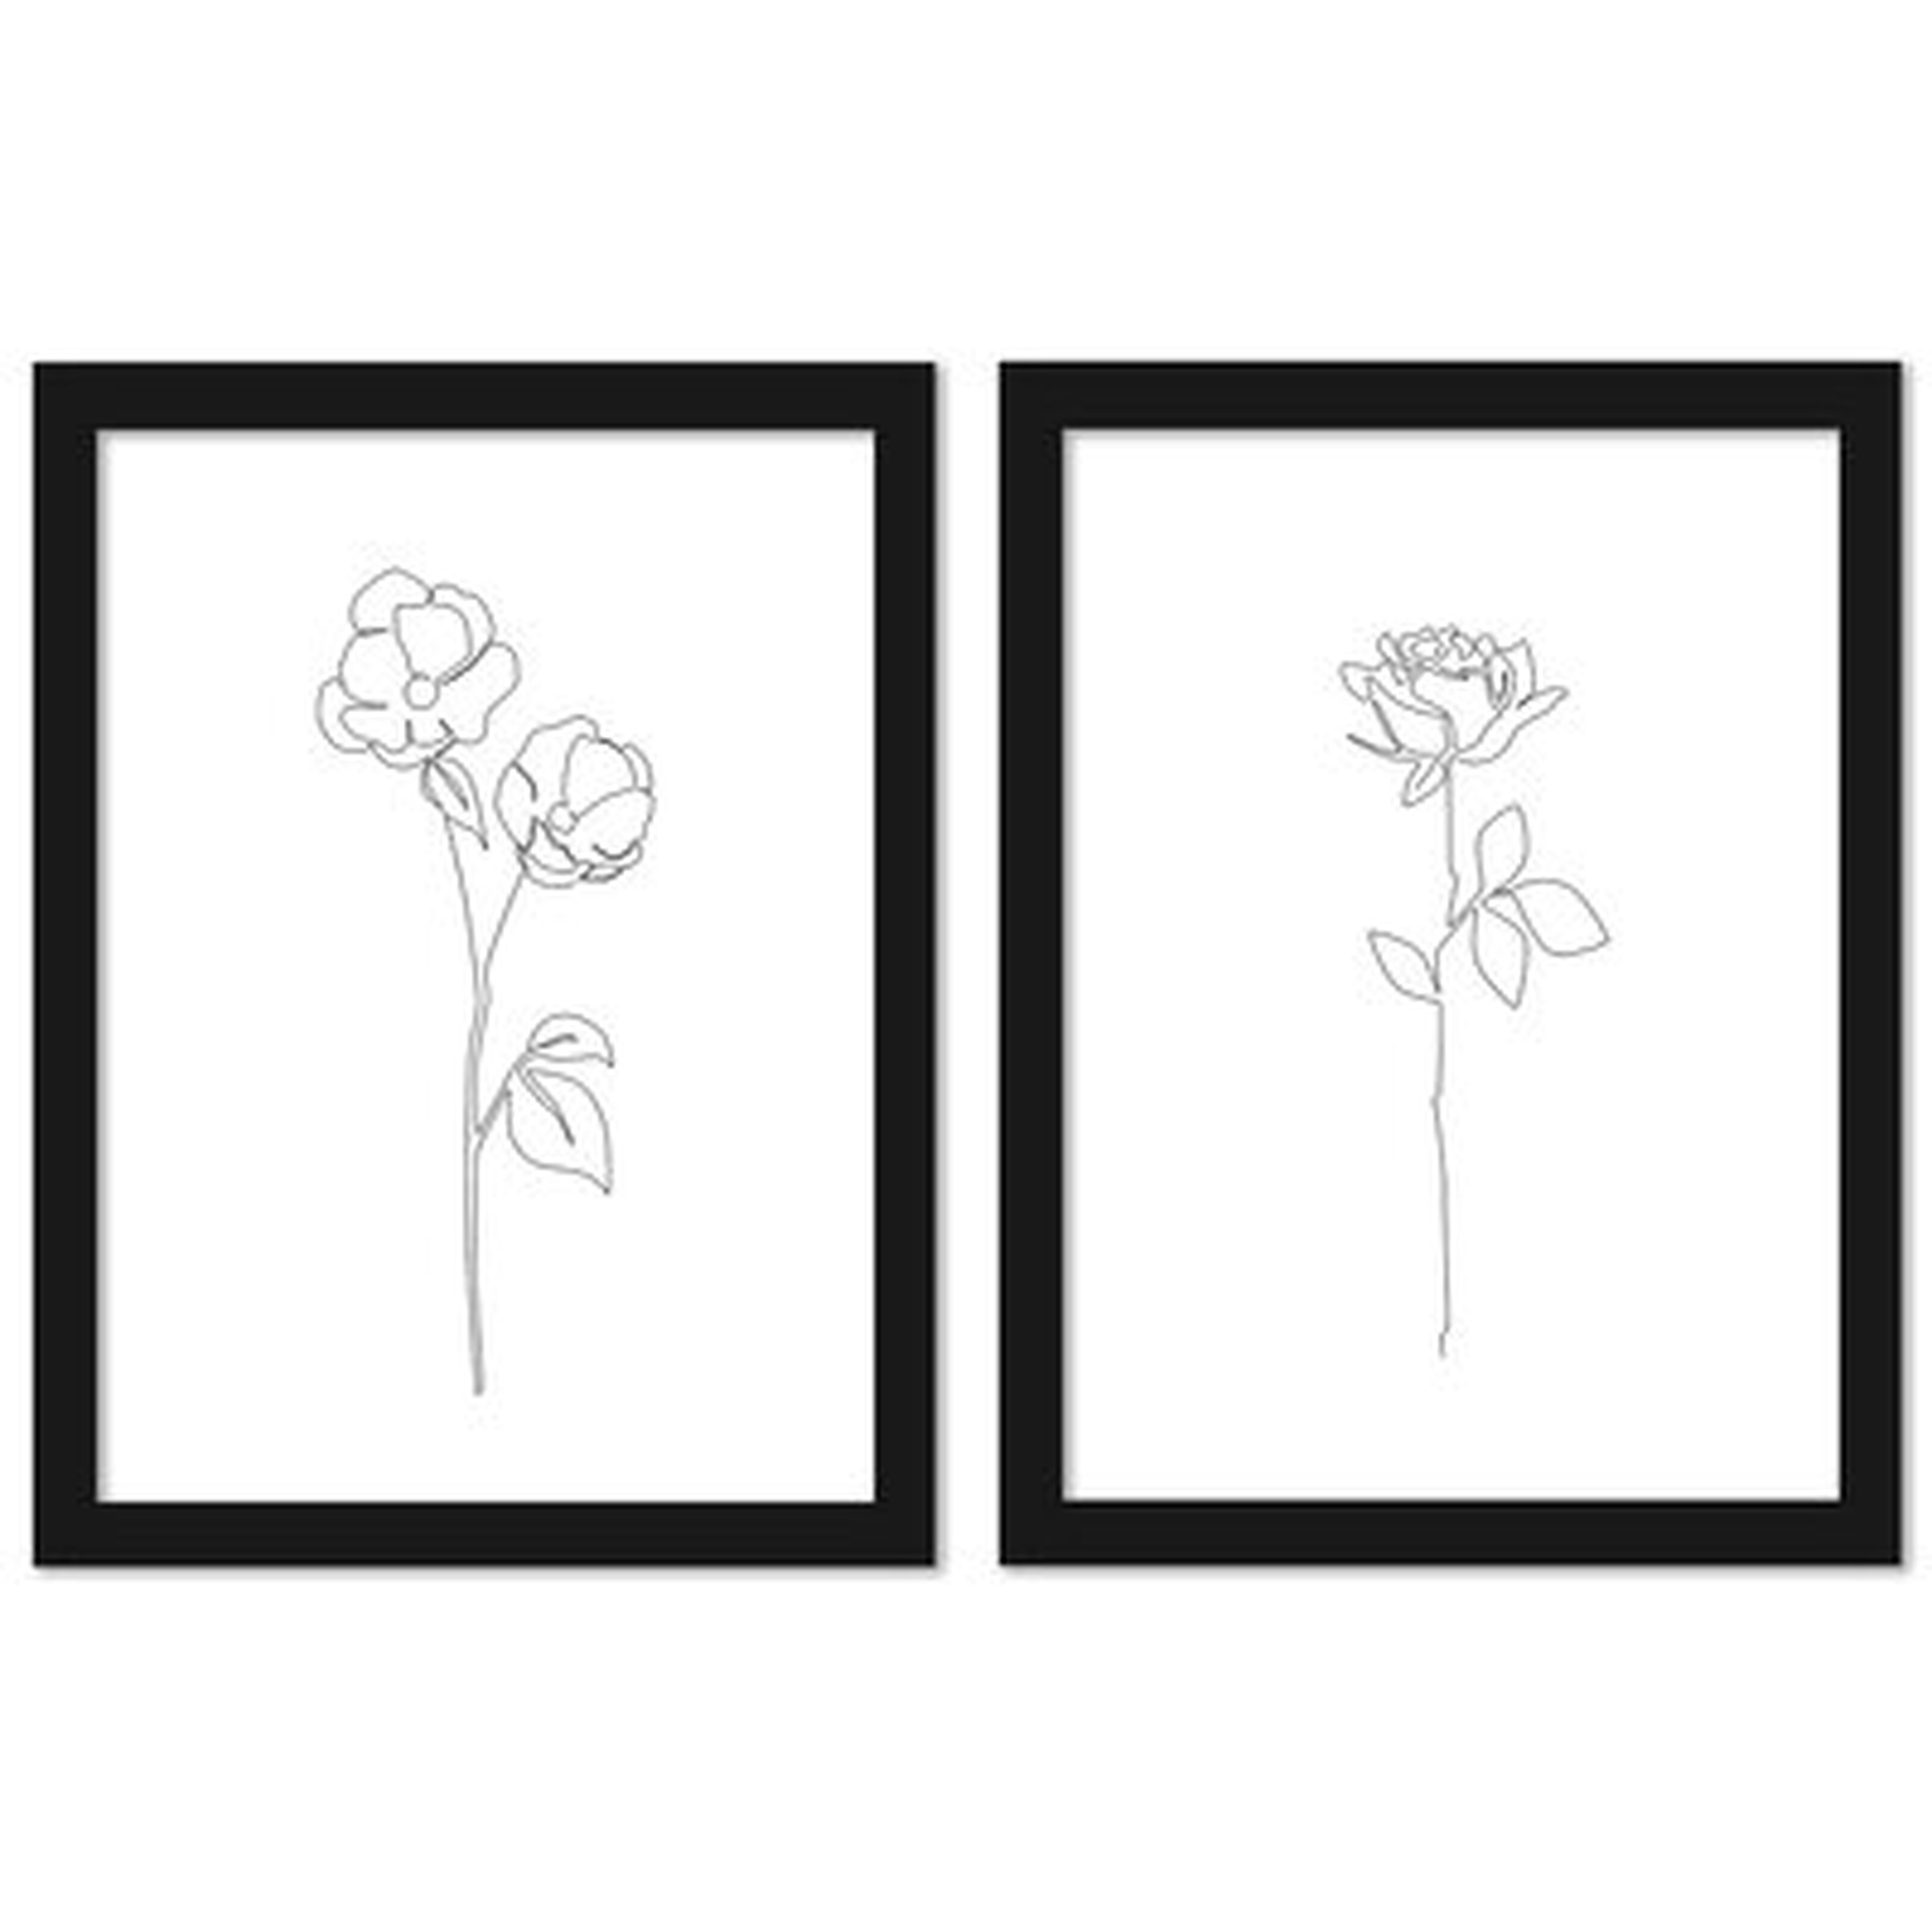 Blossom Out - 2 Piece Drawing Print Set - Wayfair